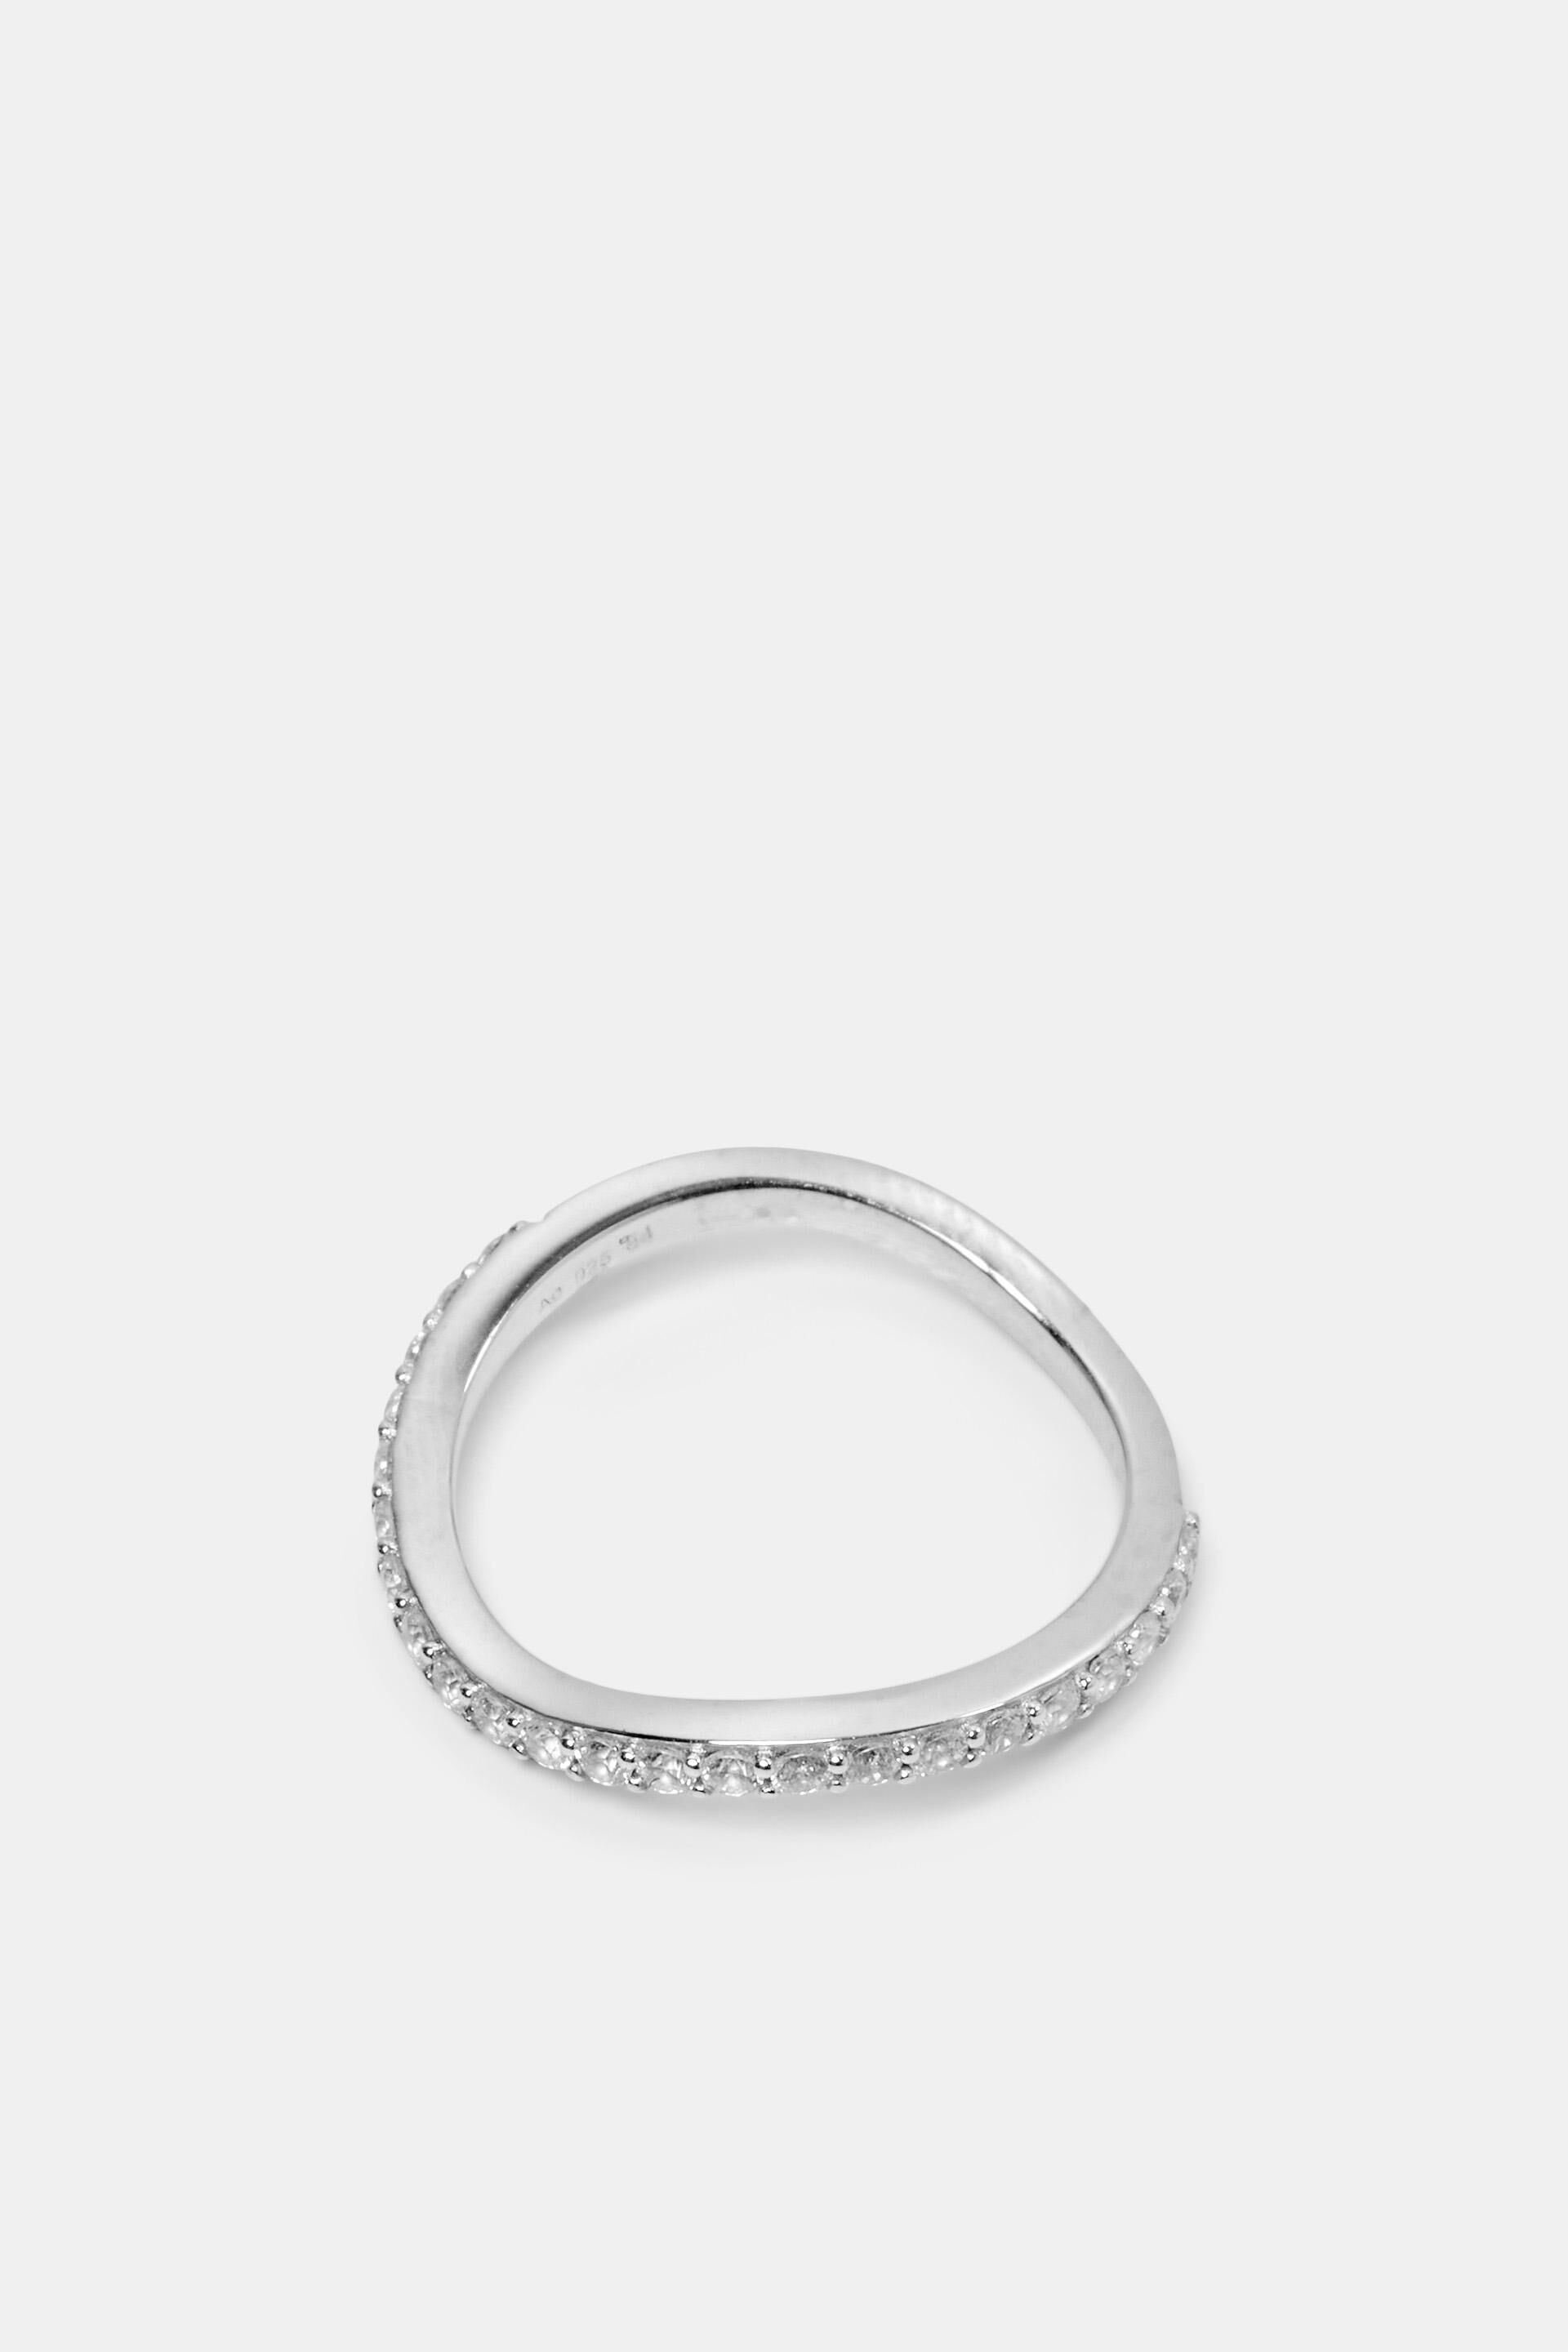 Esprit Ring Silver Sterling Wavy